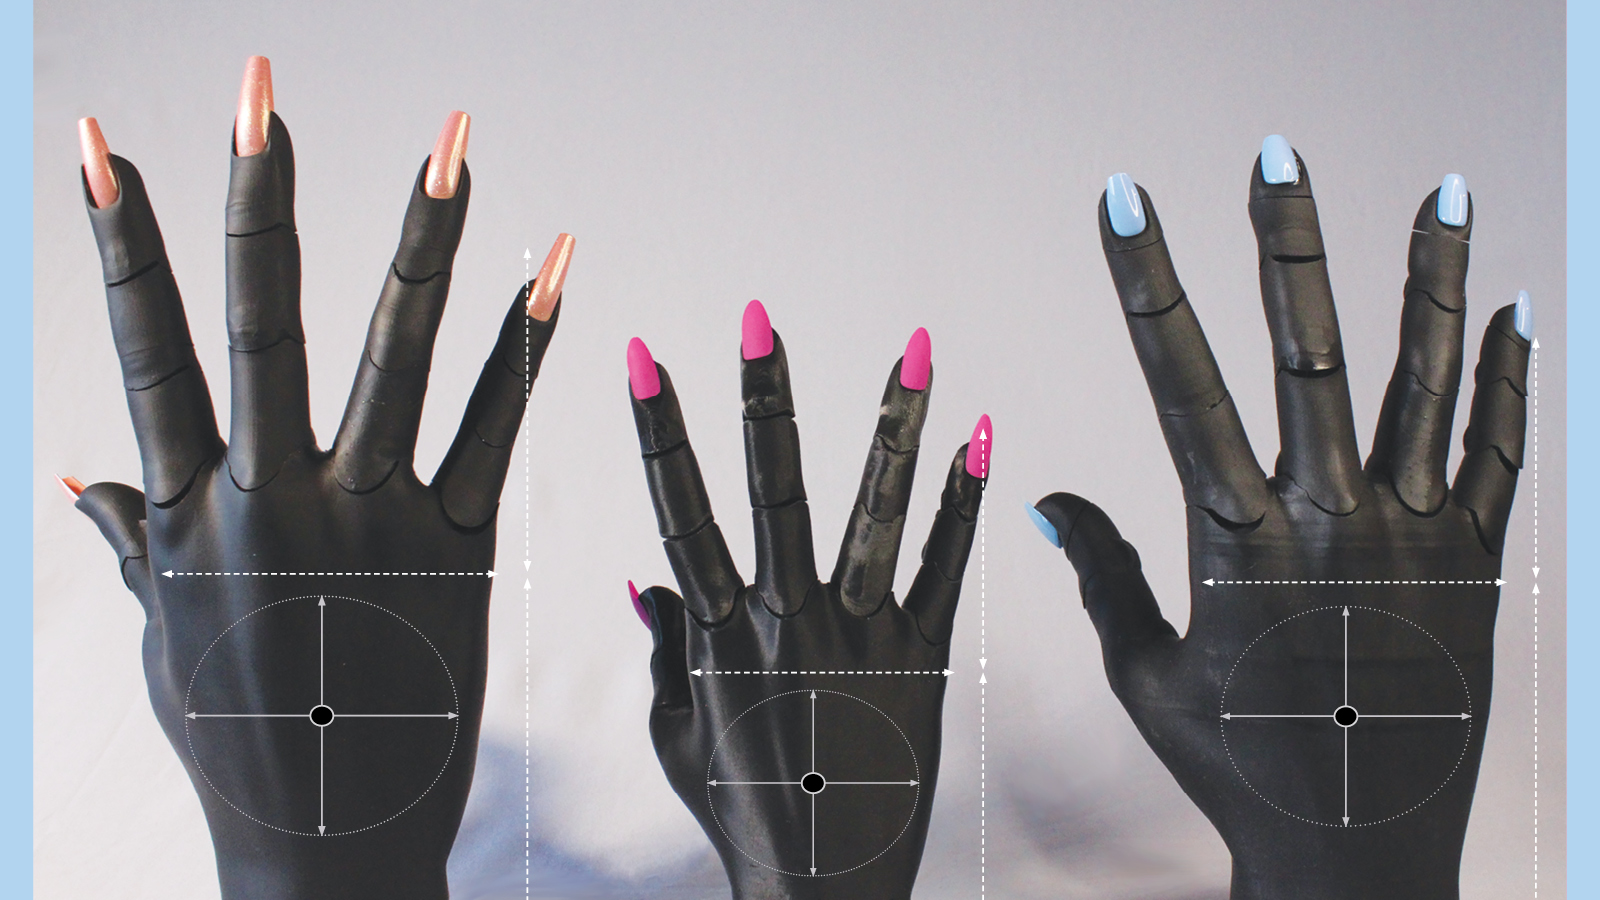 Three prosthesis hand models with different nail sets